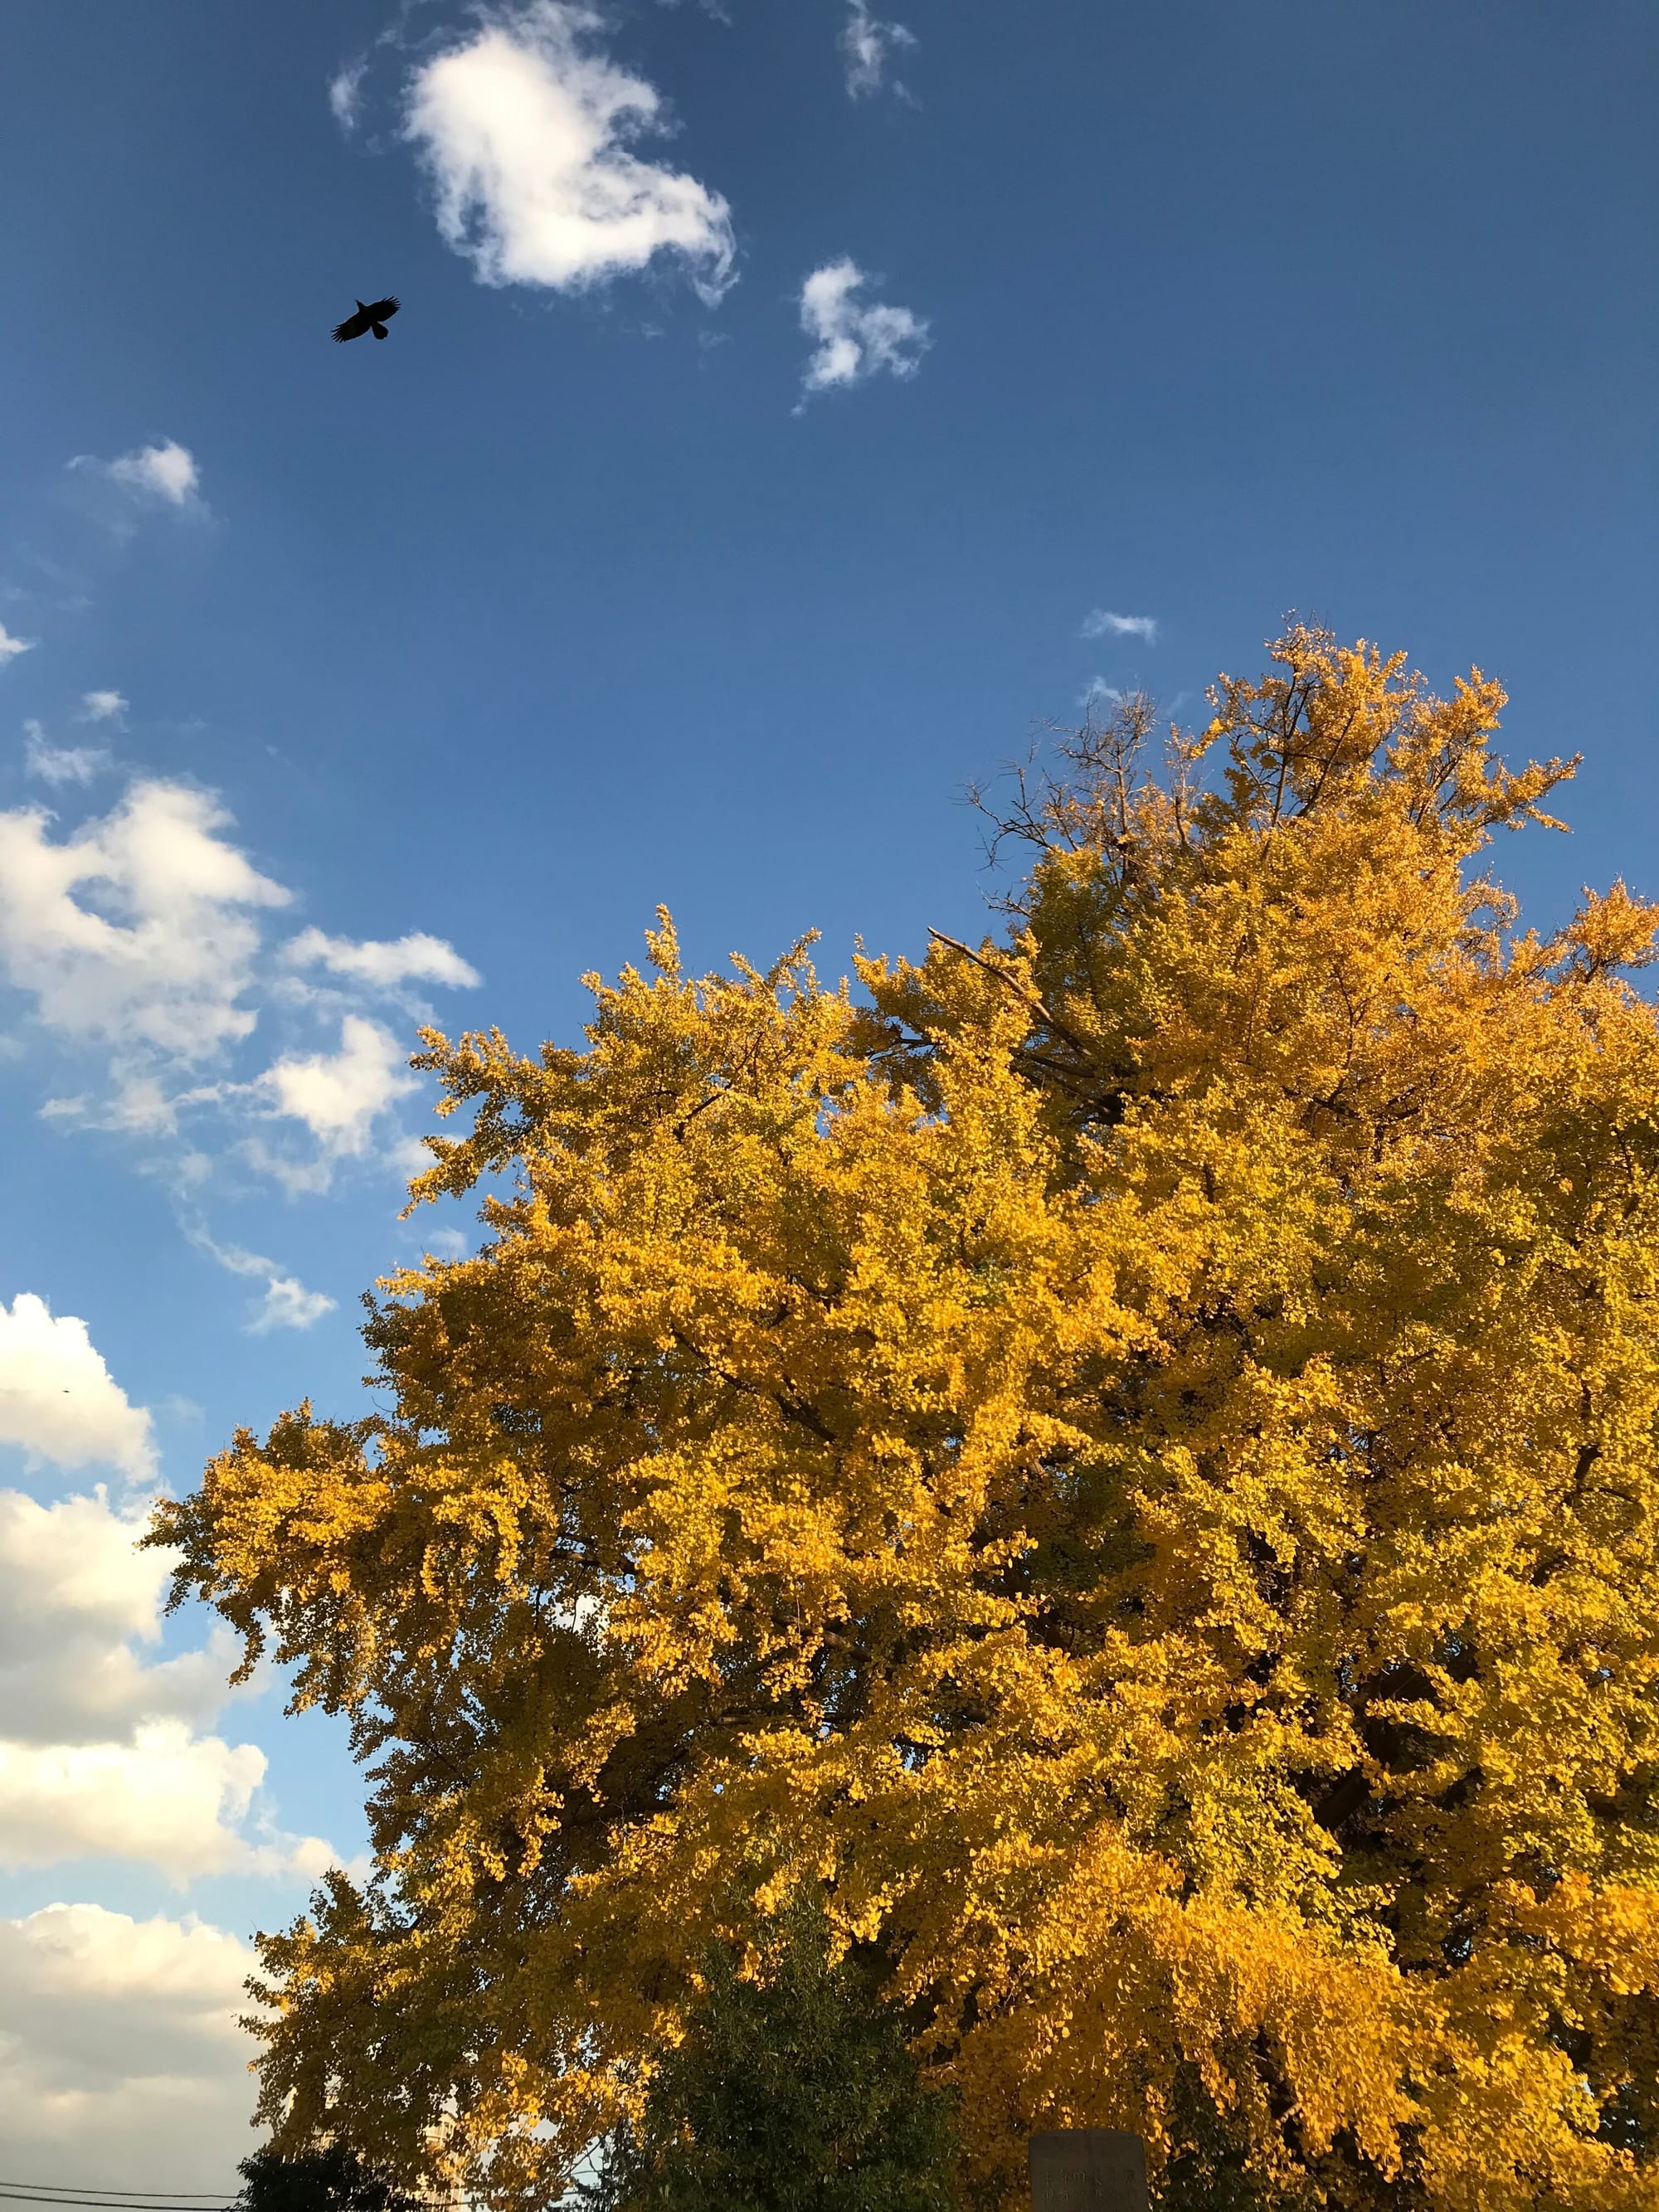 A richly gold gingko tree; a blue sky with with white clouds; and a black crow soaring away from the treetop.